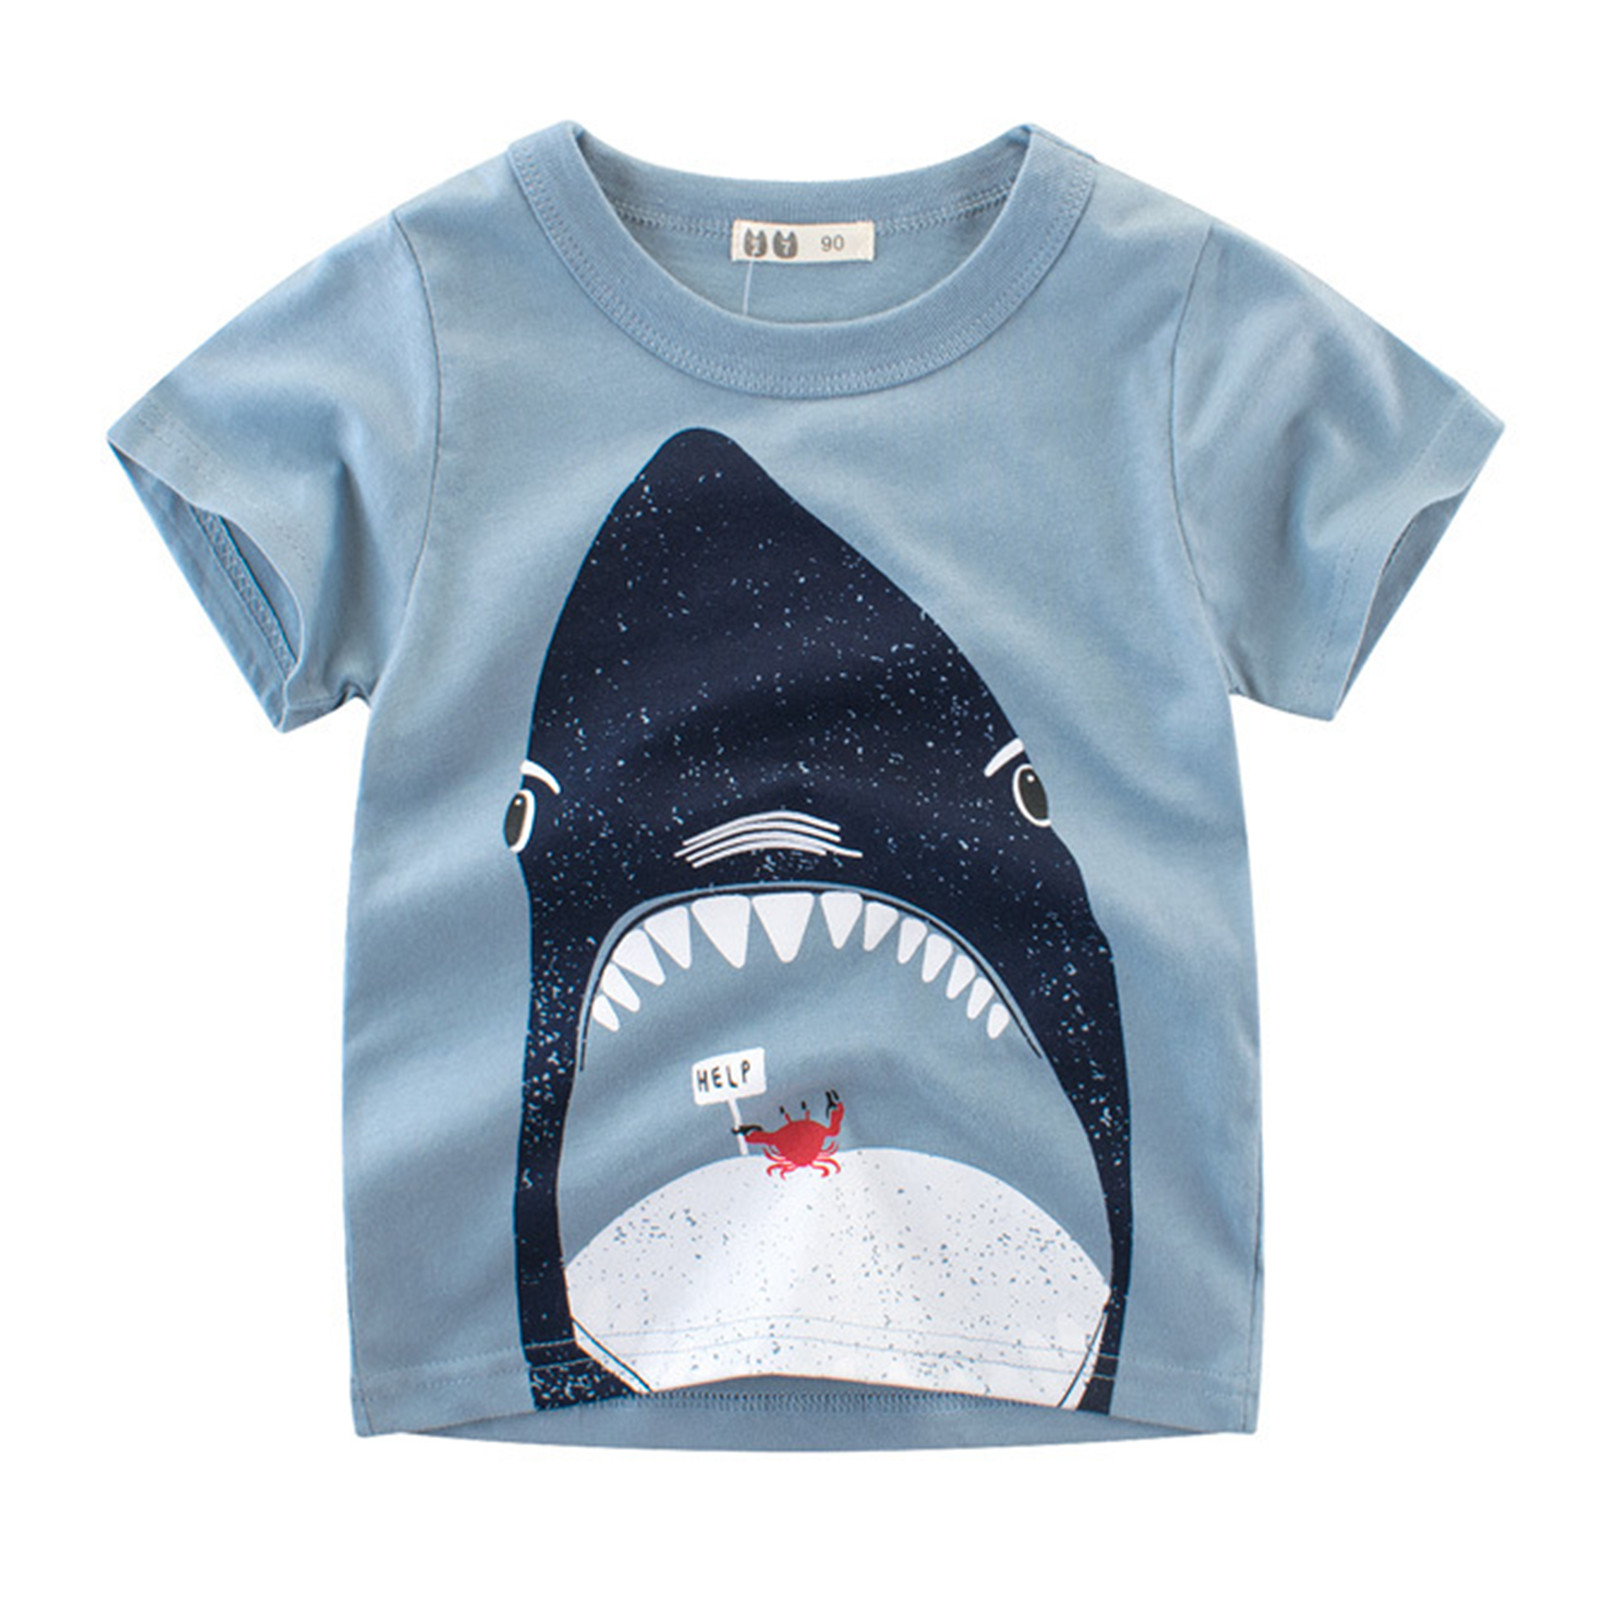 Cute Cartoon Kids T-Shirts Tops Toddler Kids Baby Boys Cartoon Sharks Short Sleeve Crewneck T Shirts Tops Tee Clothes For 1-7 Years - image 1 of 8